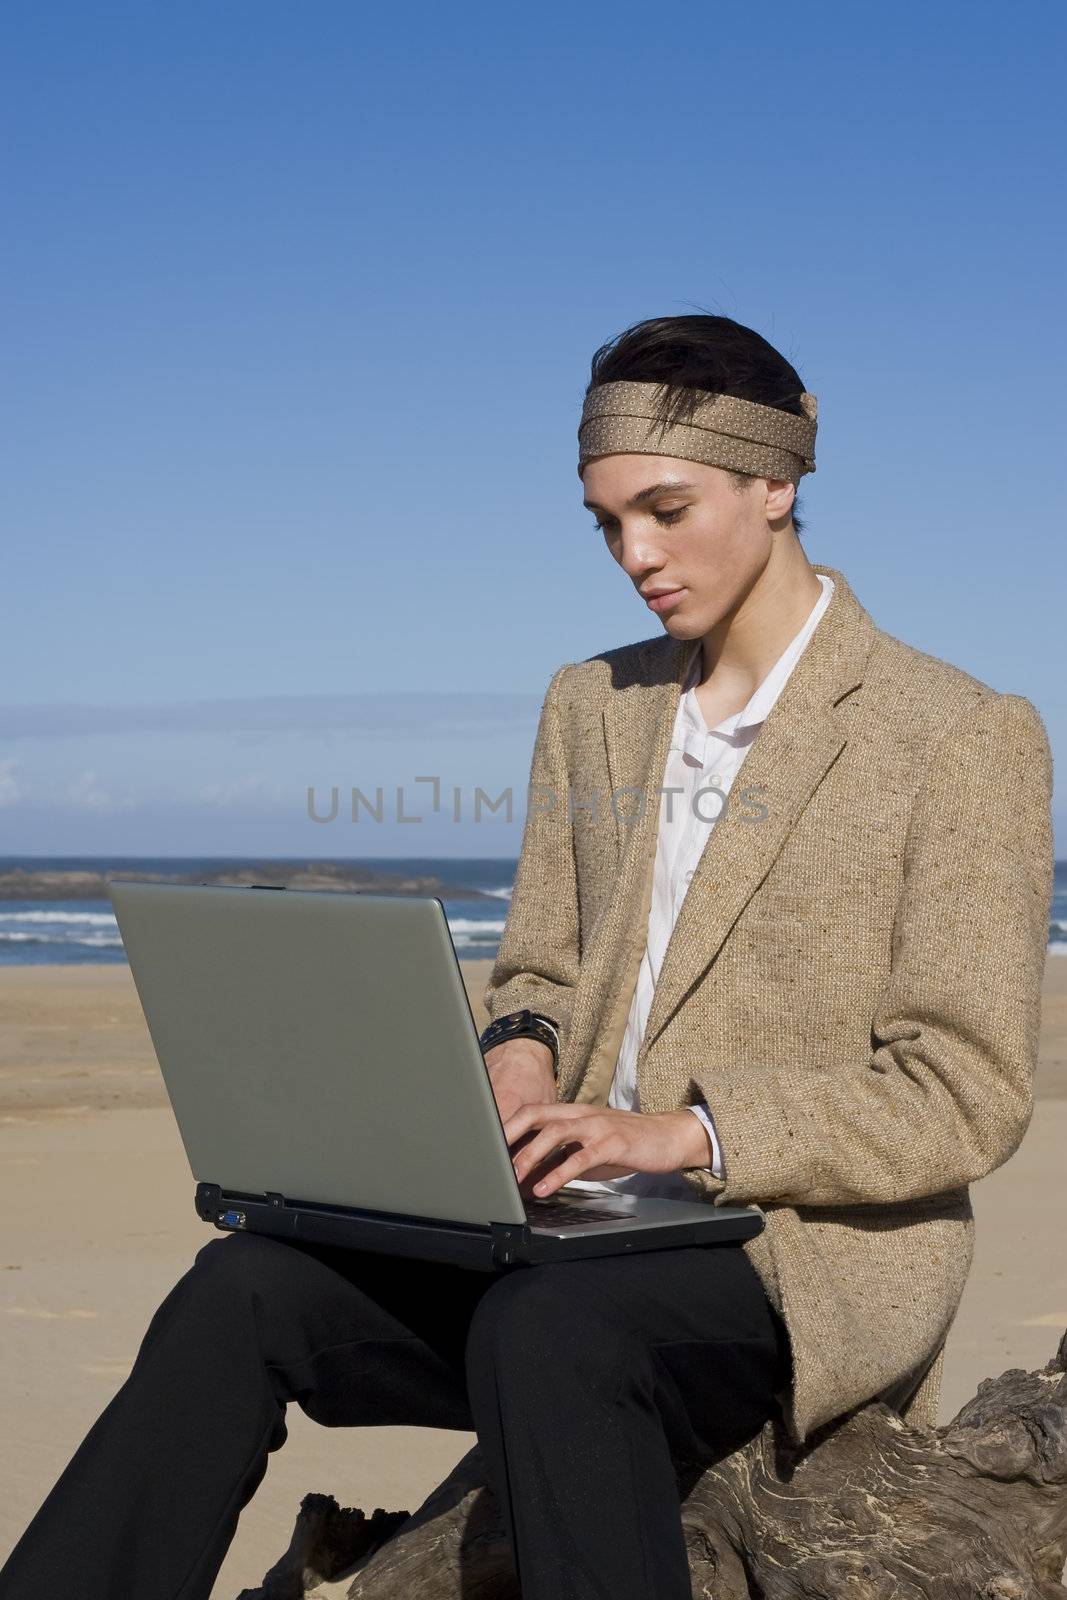 Young professional working on his laptop at the beach